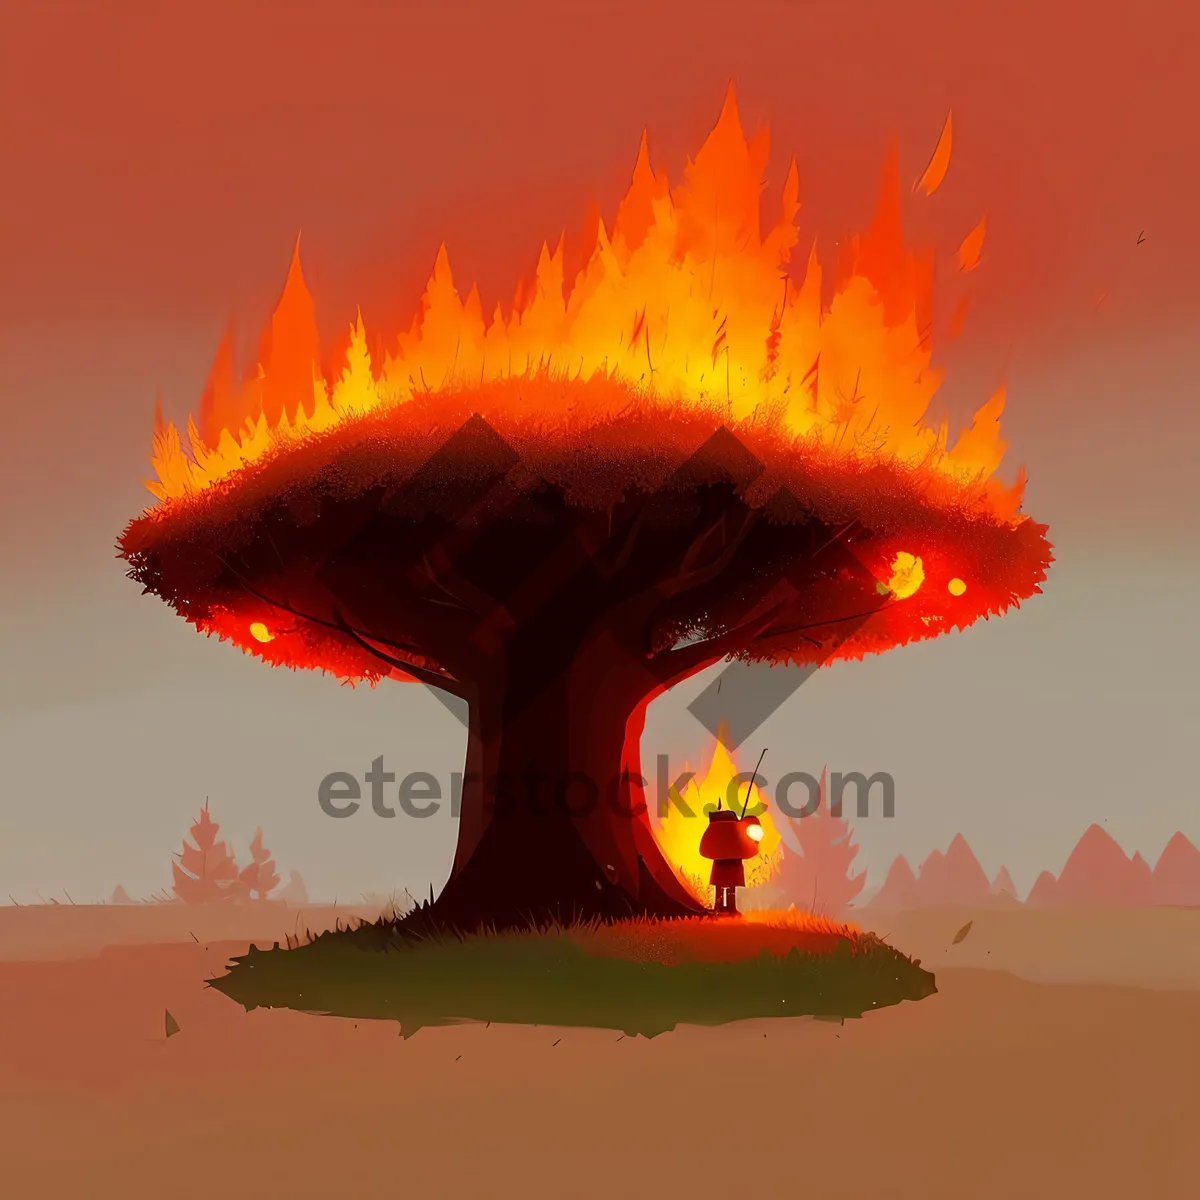 Picture of Fiery Sky: Nuclear Weapon Engulfed in Flames